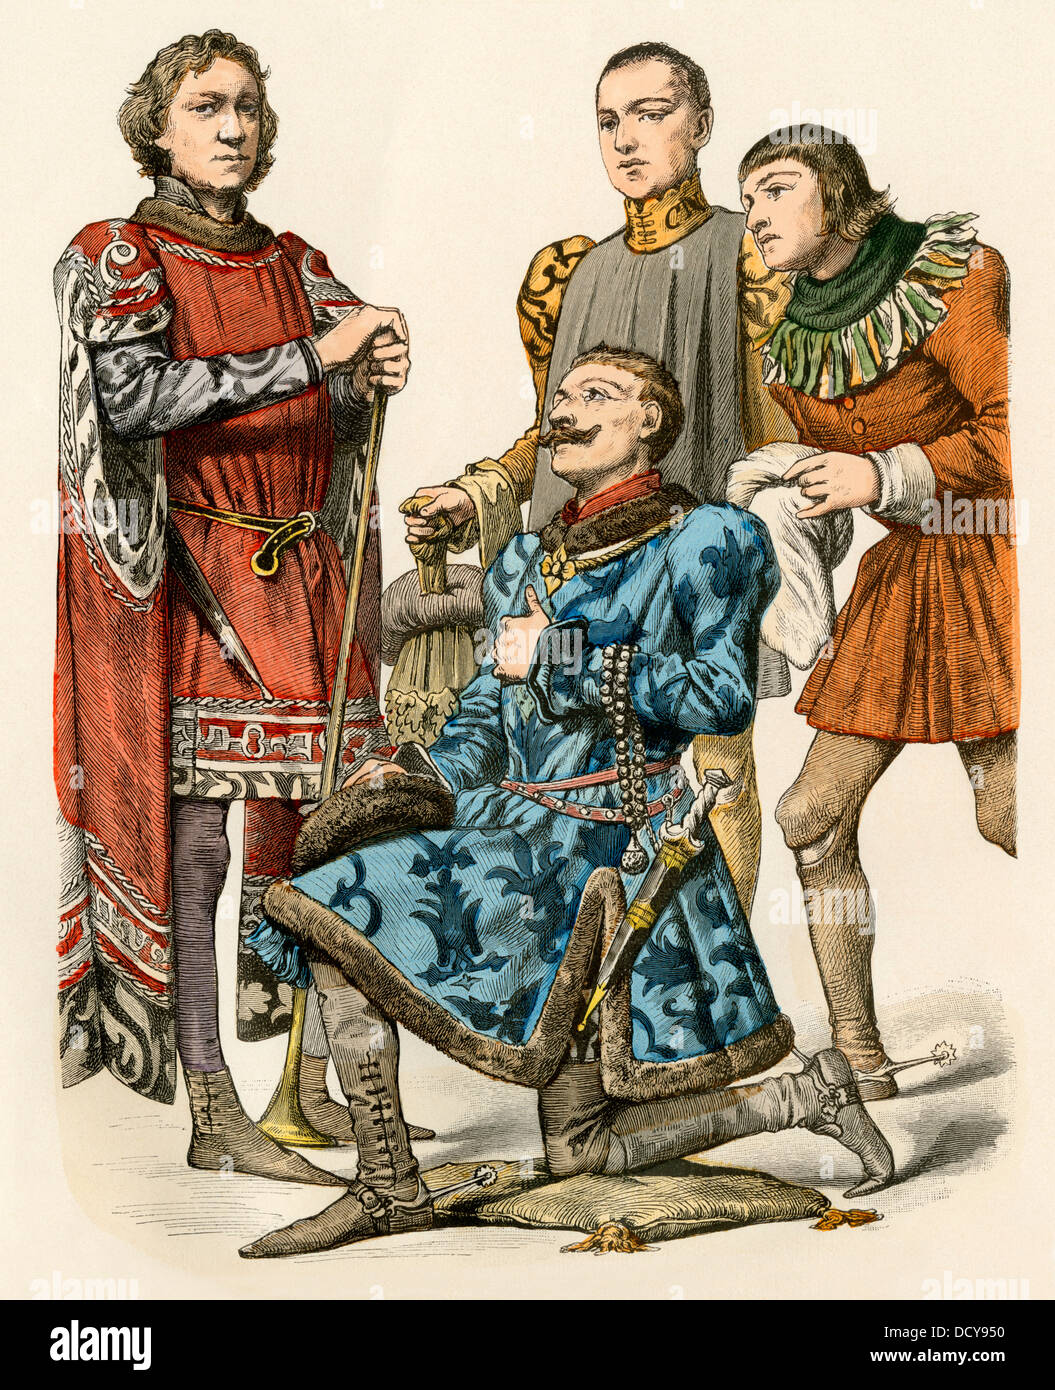 Burgundian nobility in the 1400s. Hand-colored print Stock Photo